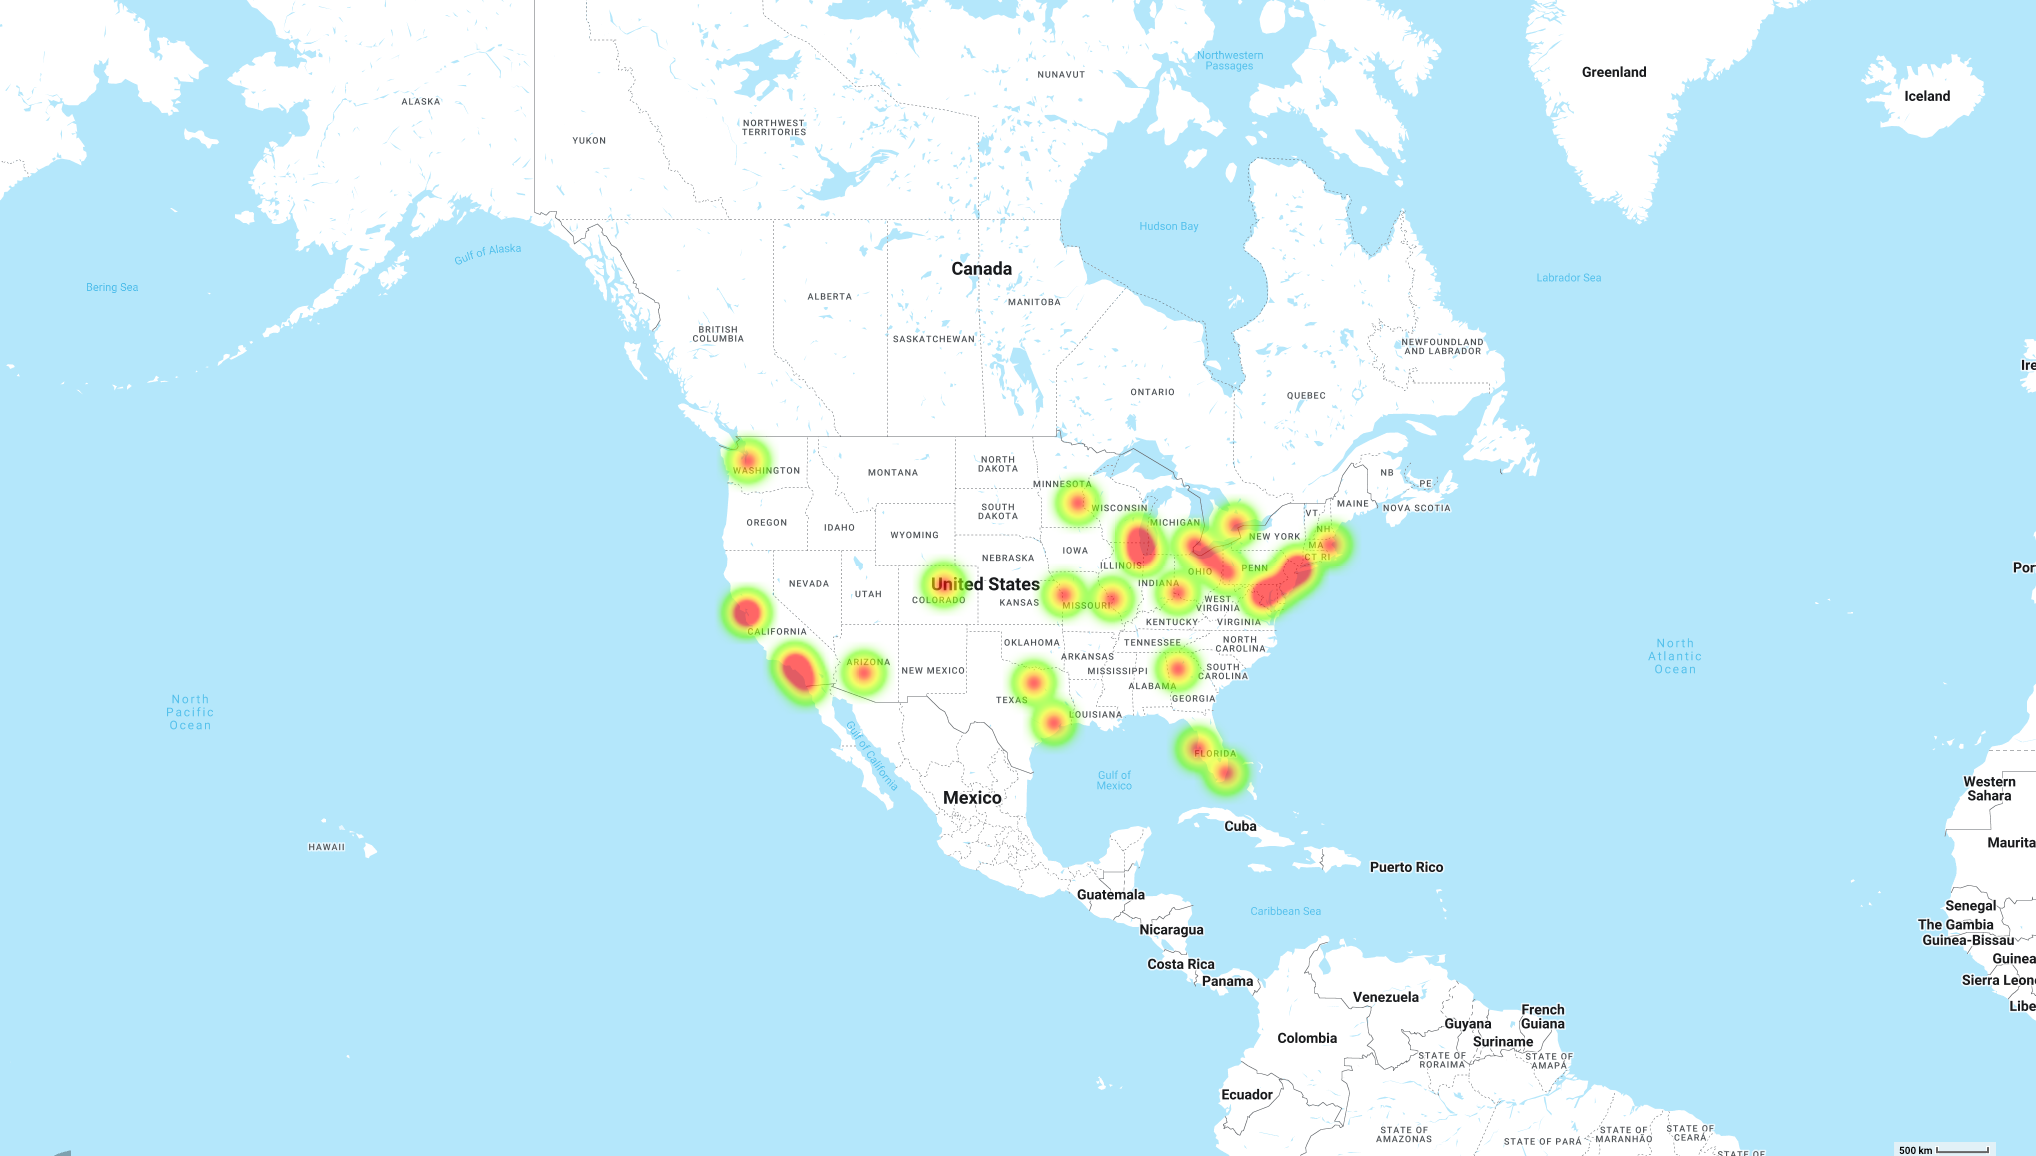 Heat Map of Major League Baseball Stadiums in the US made with Mapize heatmap creator.